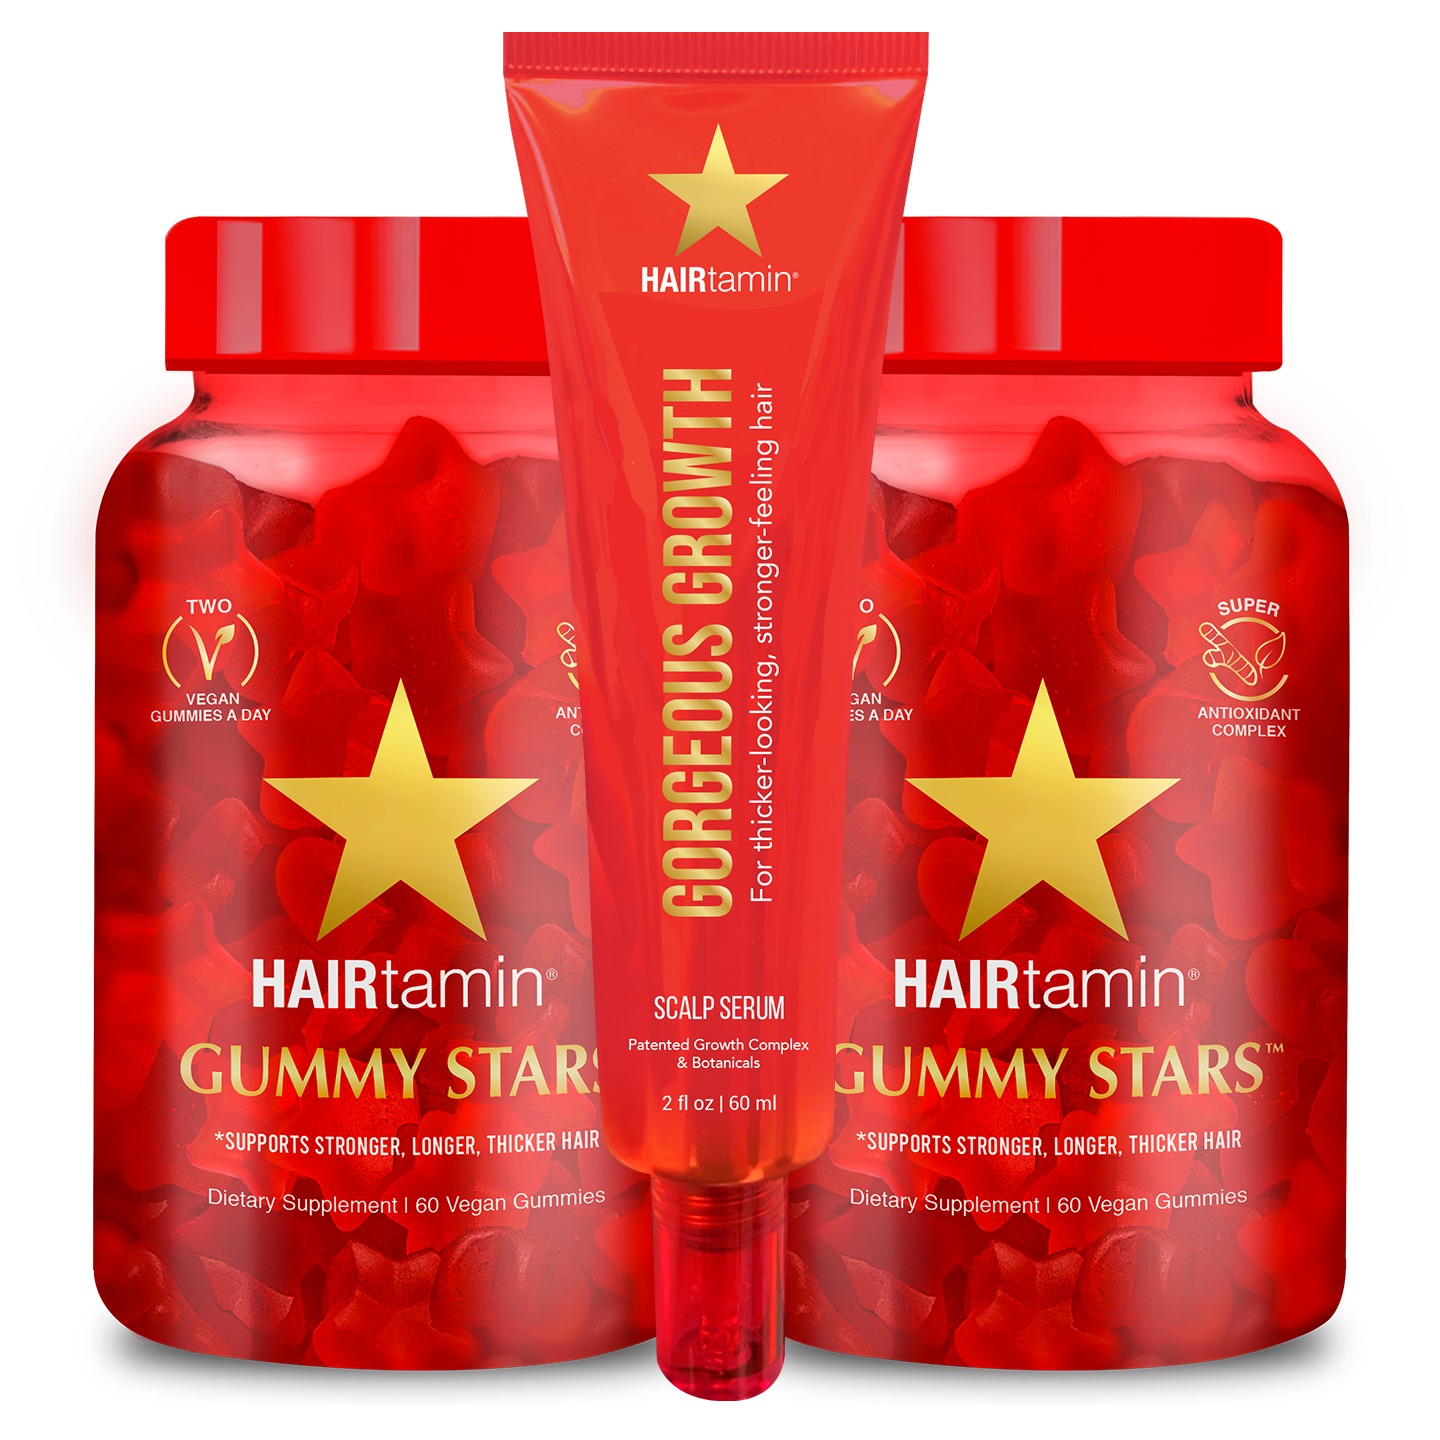 Two Gummy Stars bottles and a Scalp Serum tube